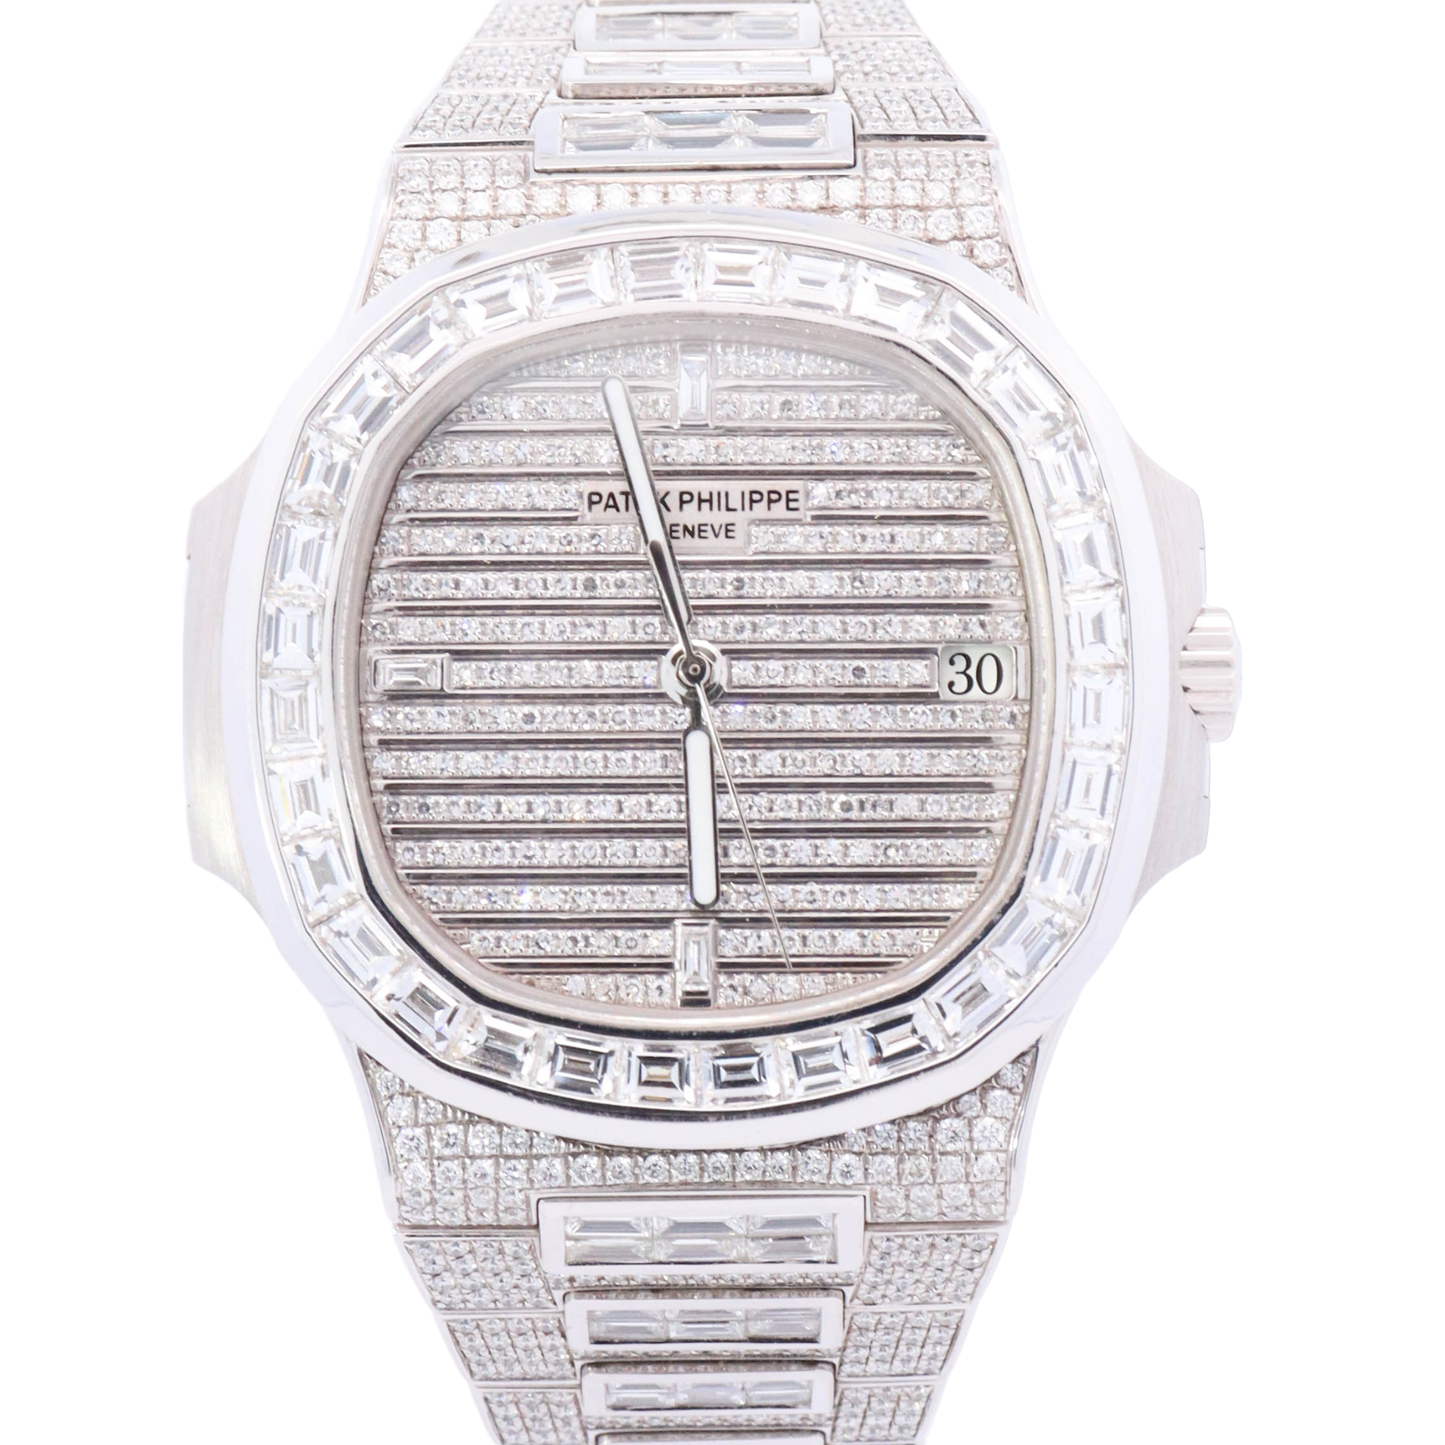 Patek Philippe Nautilus 40mm Iced Out Stainless Steel Pave Diamond Dial Watch Reference# 5711/1A - Happy Jewelers Fine Jewelry Lifetime Warranty